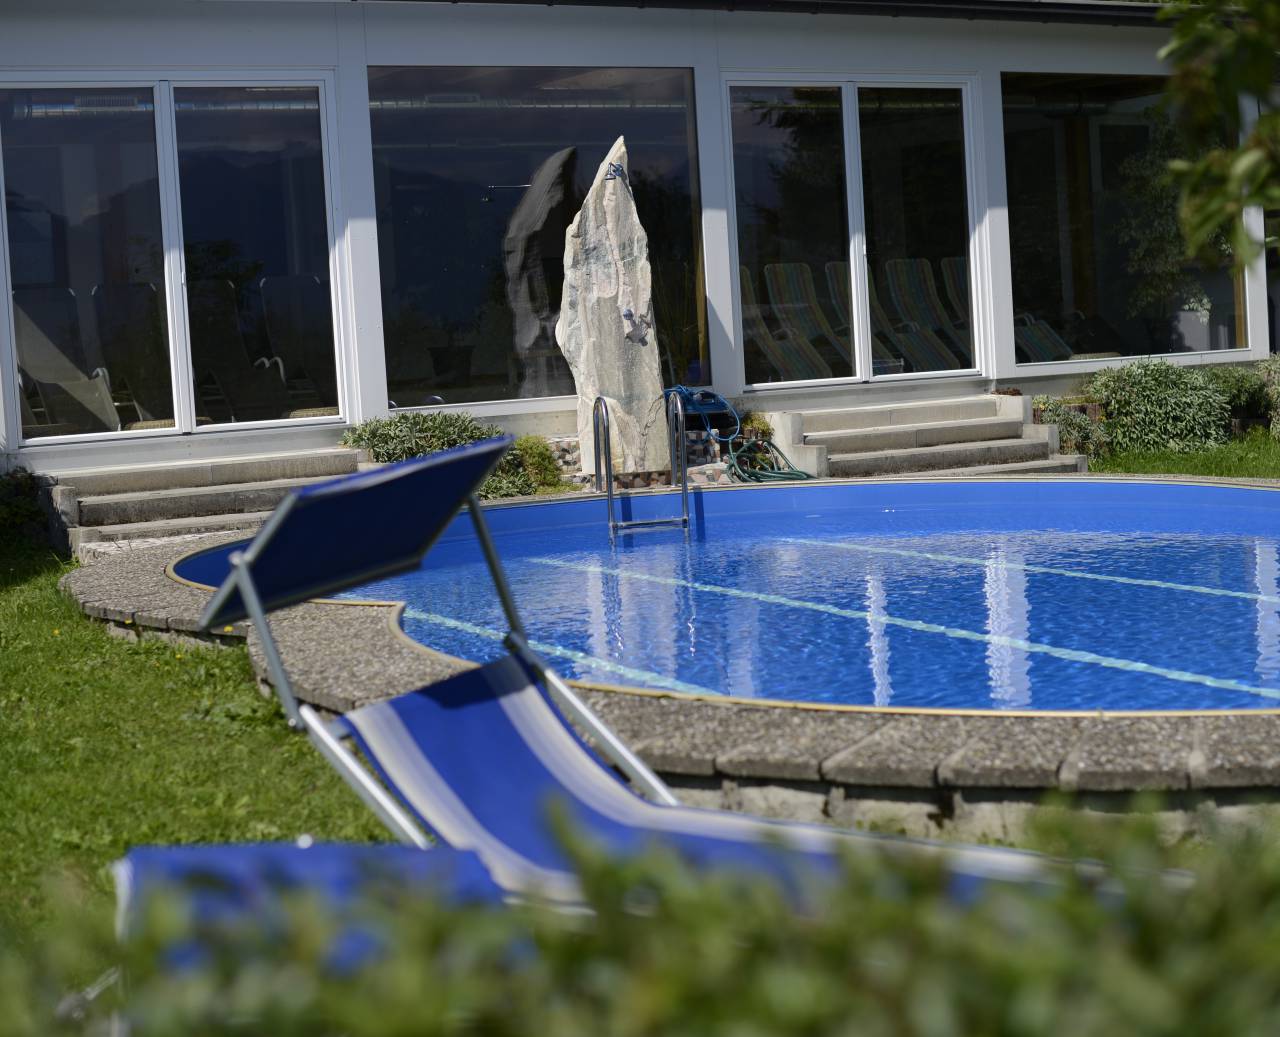 Outdoor pool in the garden with sun loungers in summer